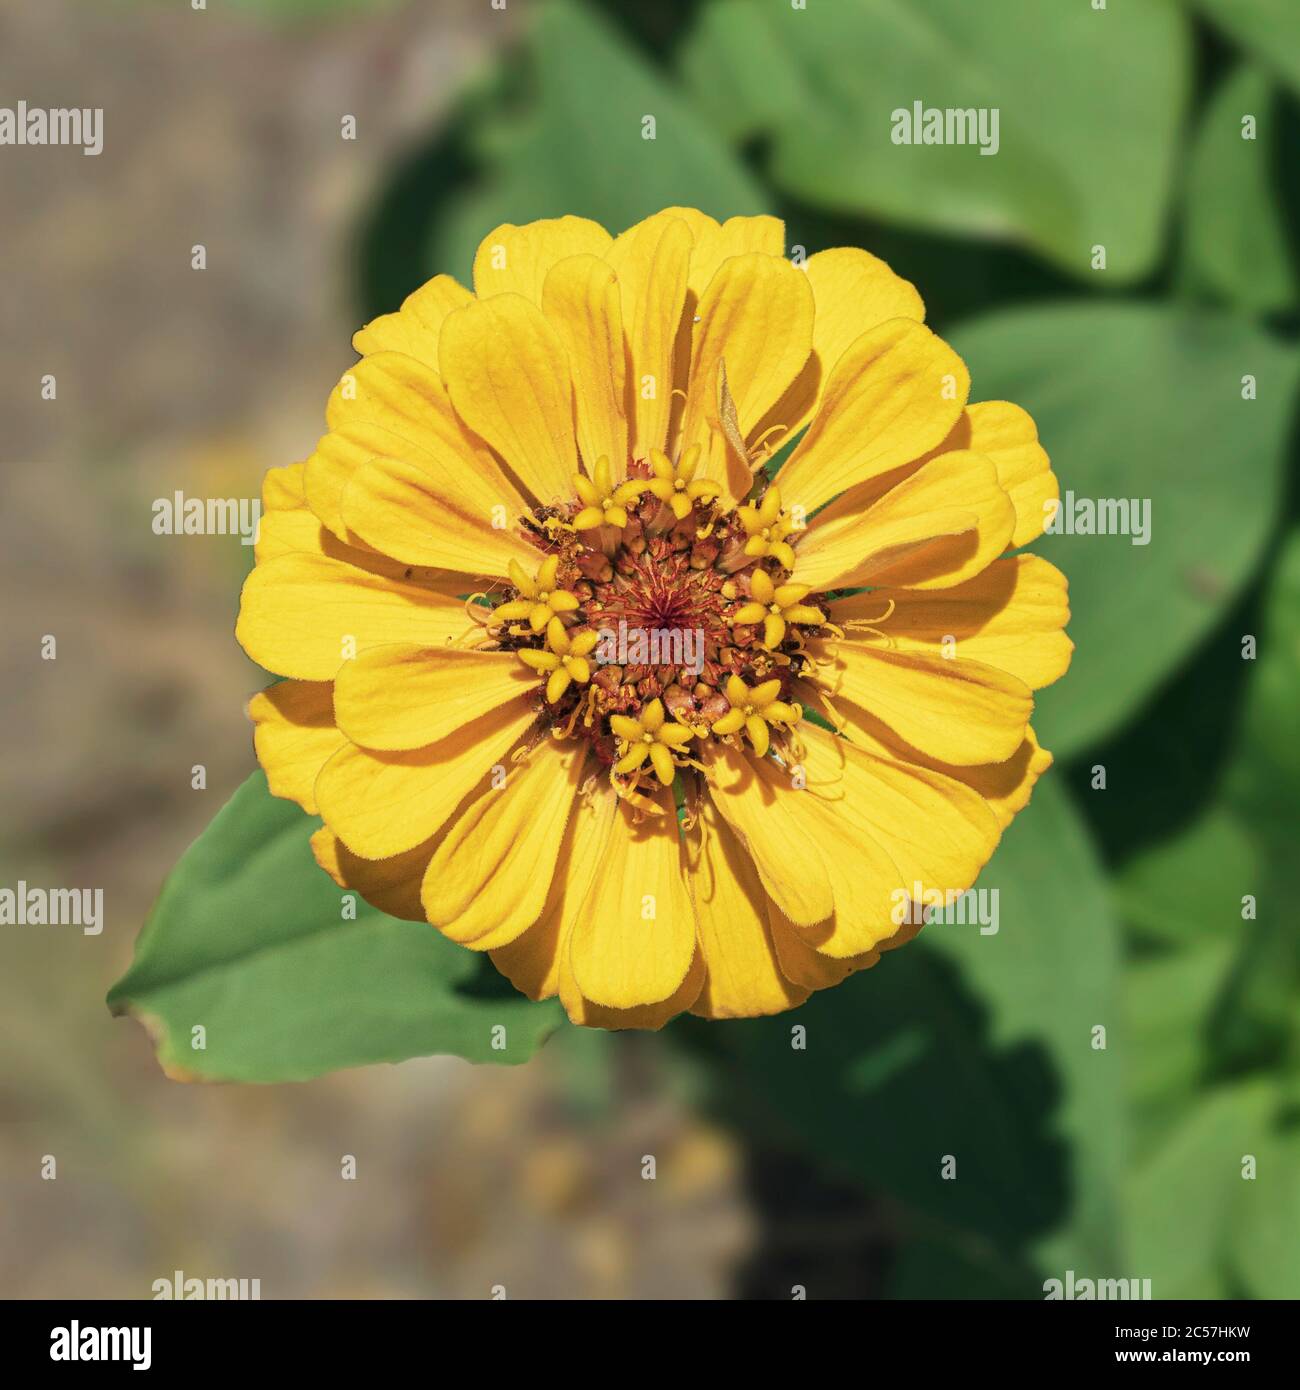 isolated semi-double golden yellow zinnia flower rises high above the blurred leaves and soil below Stock Photo